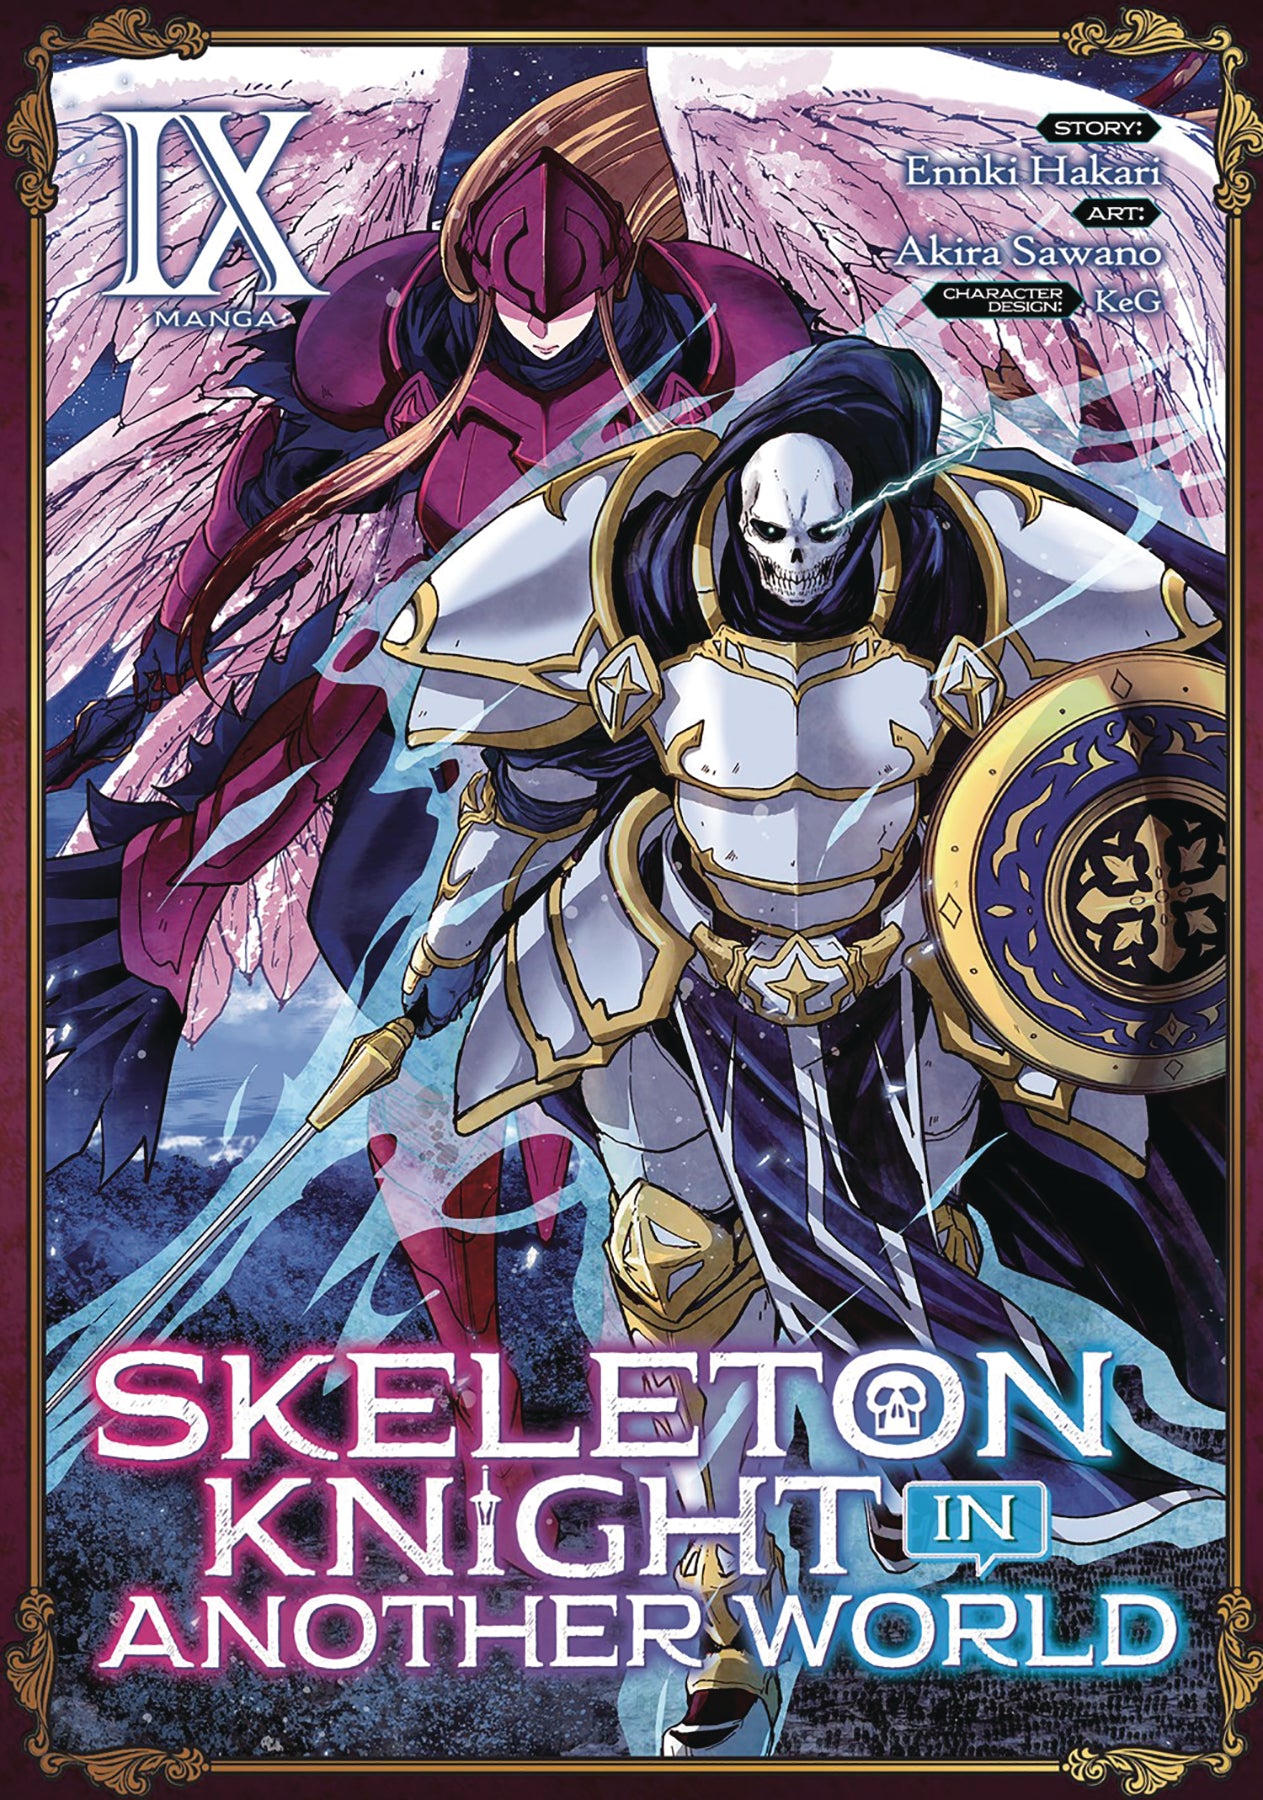 Skeleton Knight in Another World - Official Trailer 